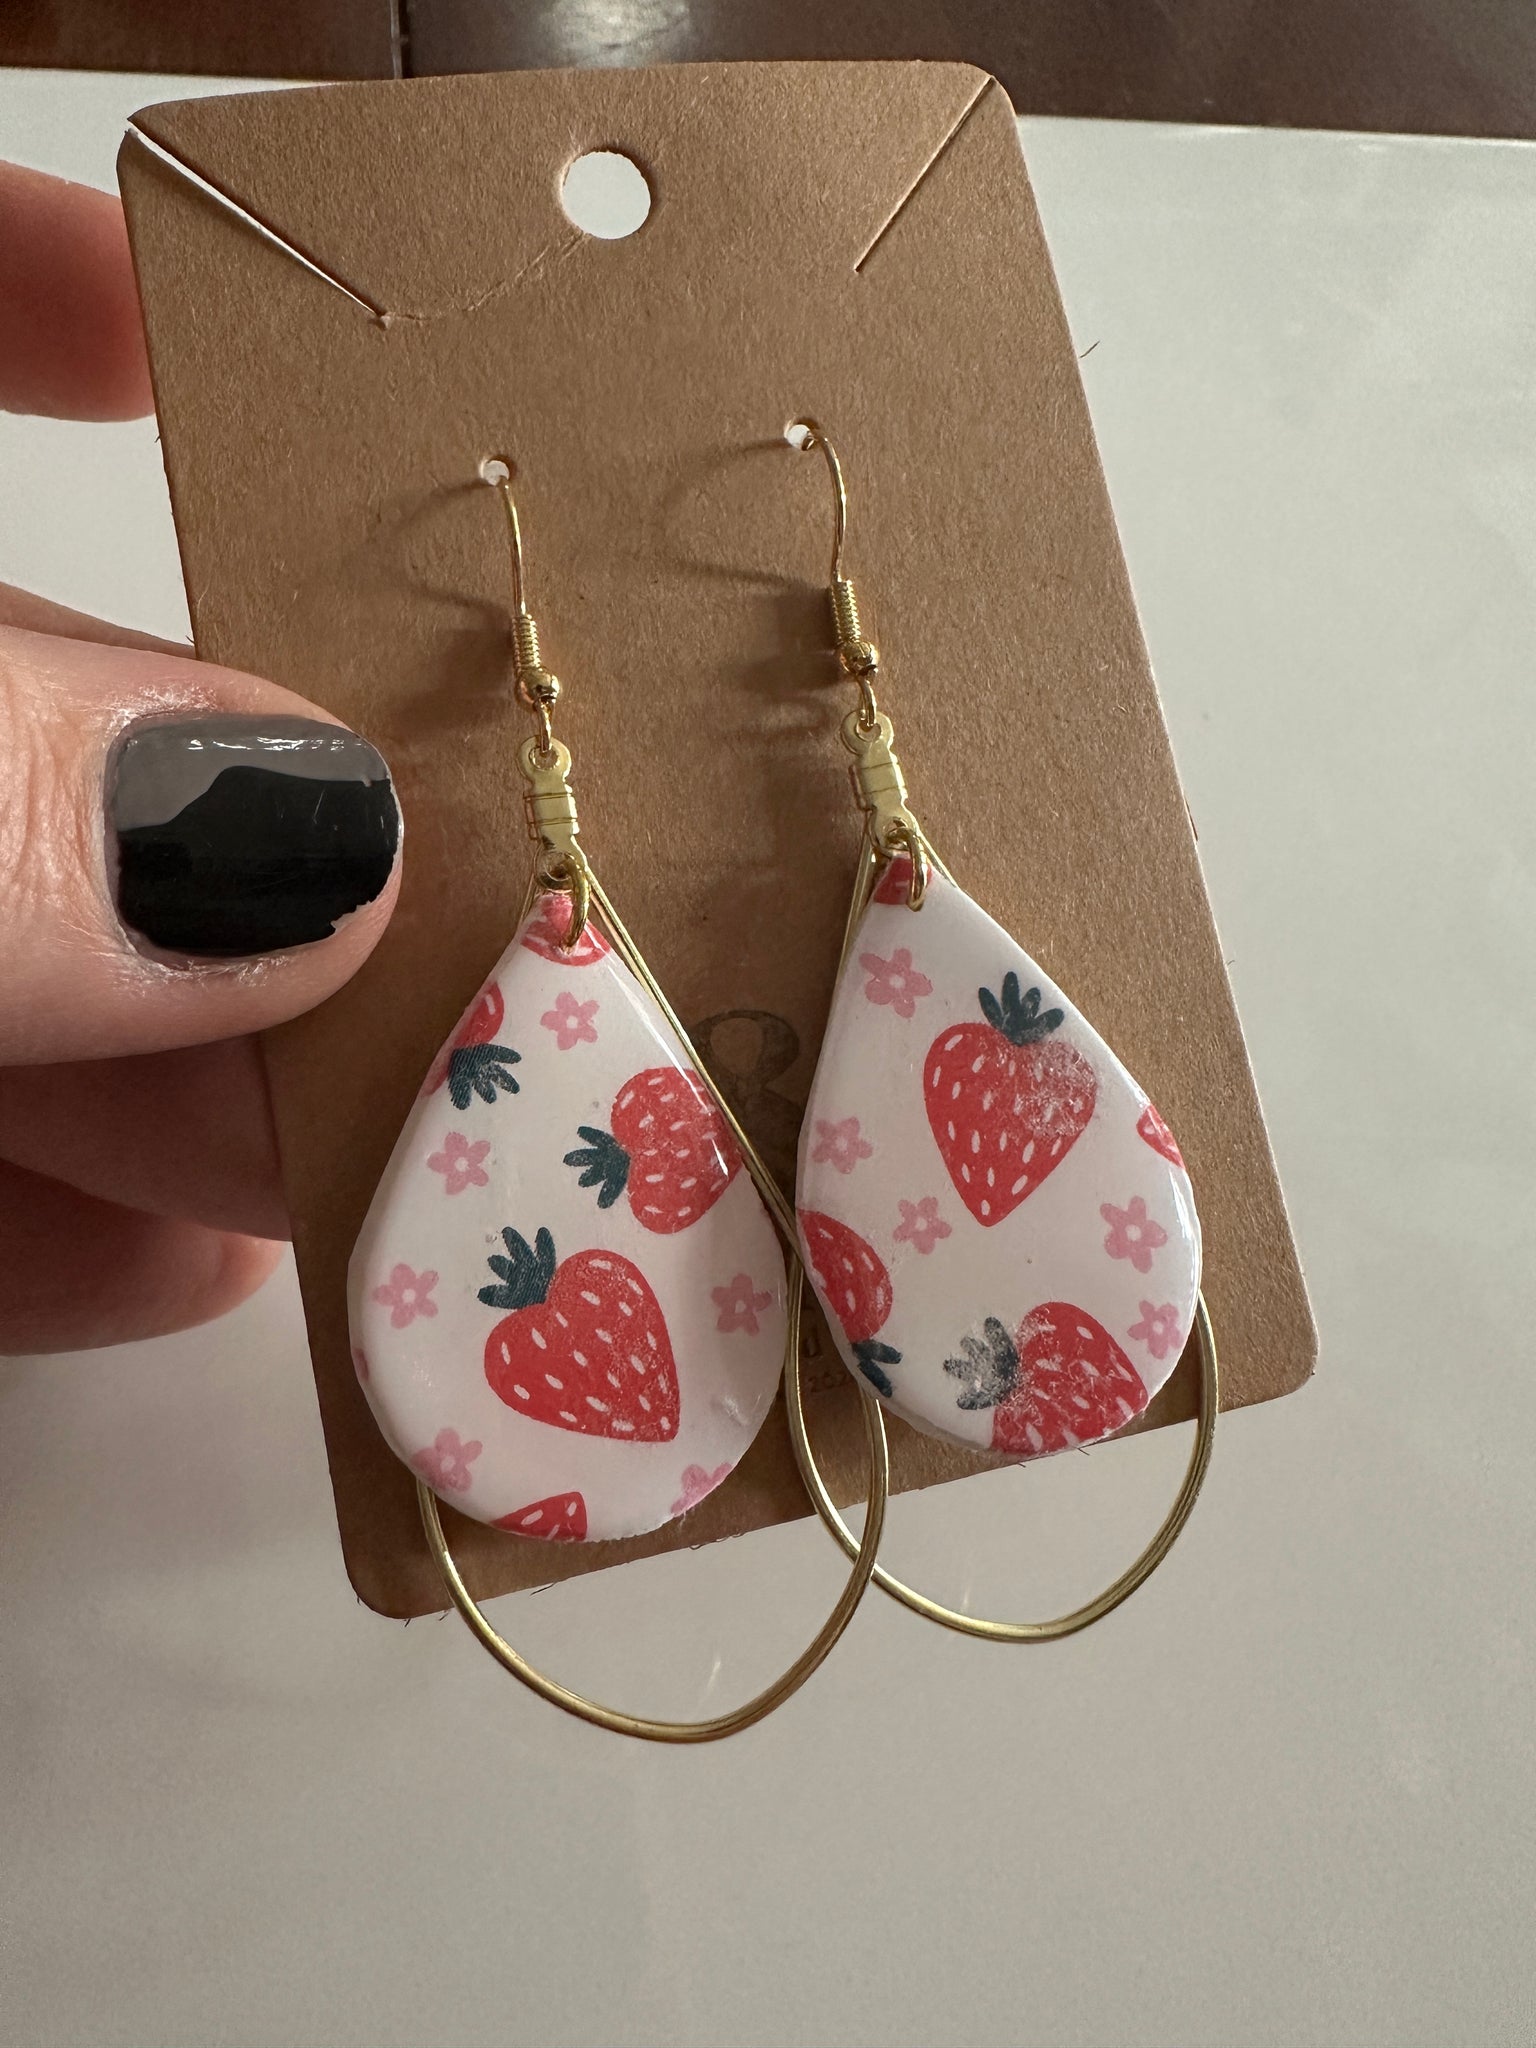 Strawberry and Pink dangles